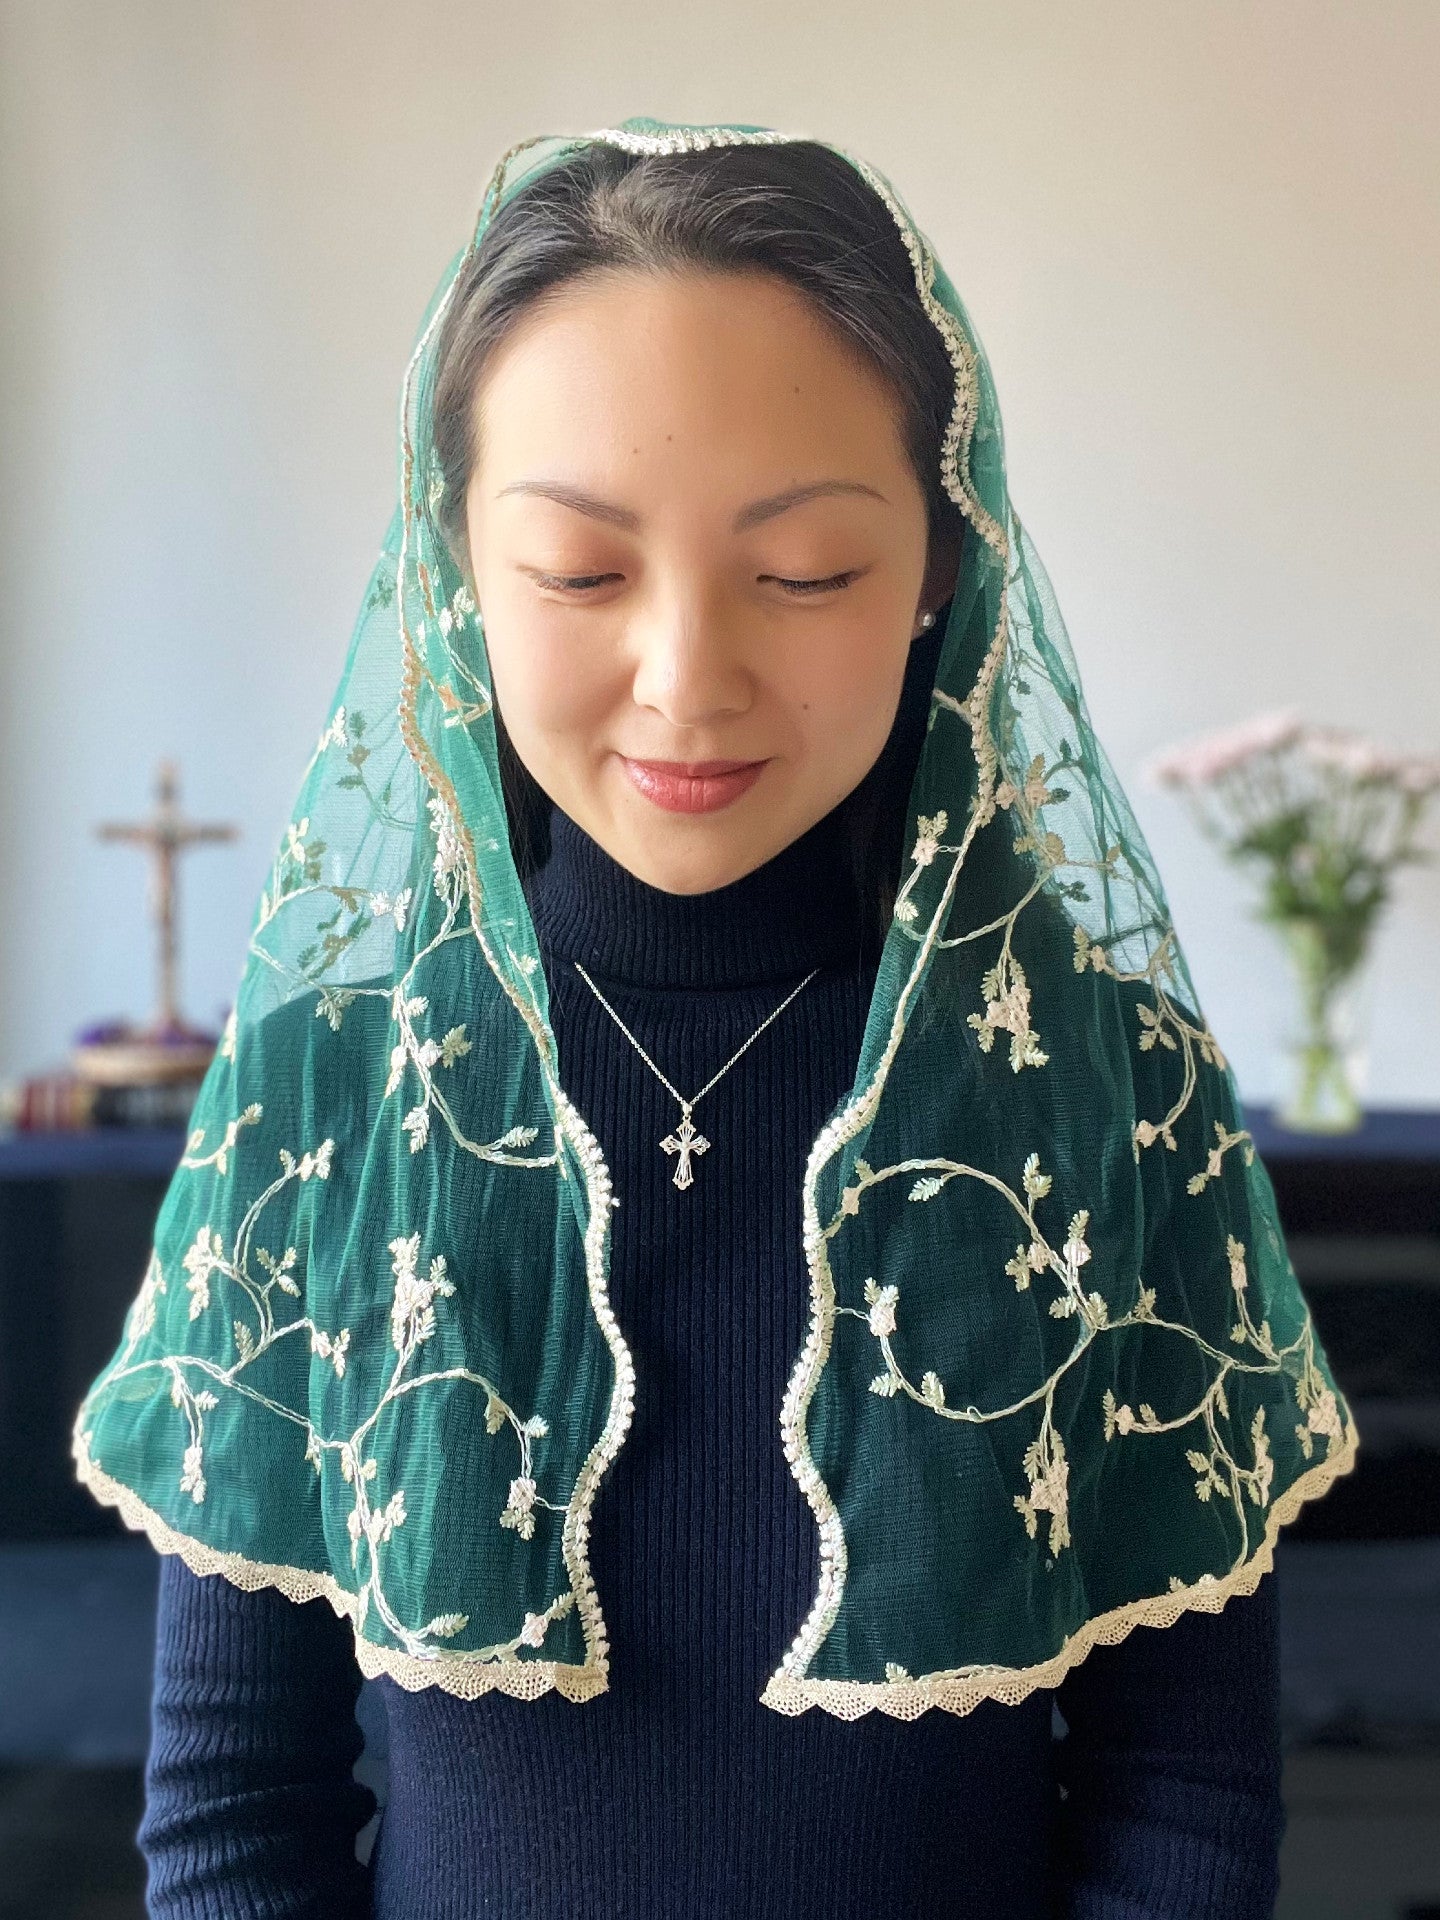 Our Lady of Guadalupe 1st Apparition D mantilla (Green Floral)